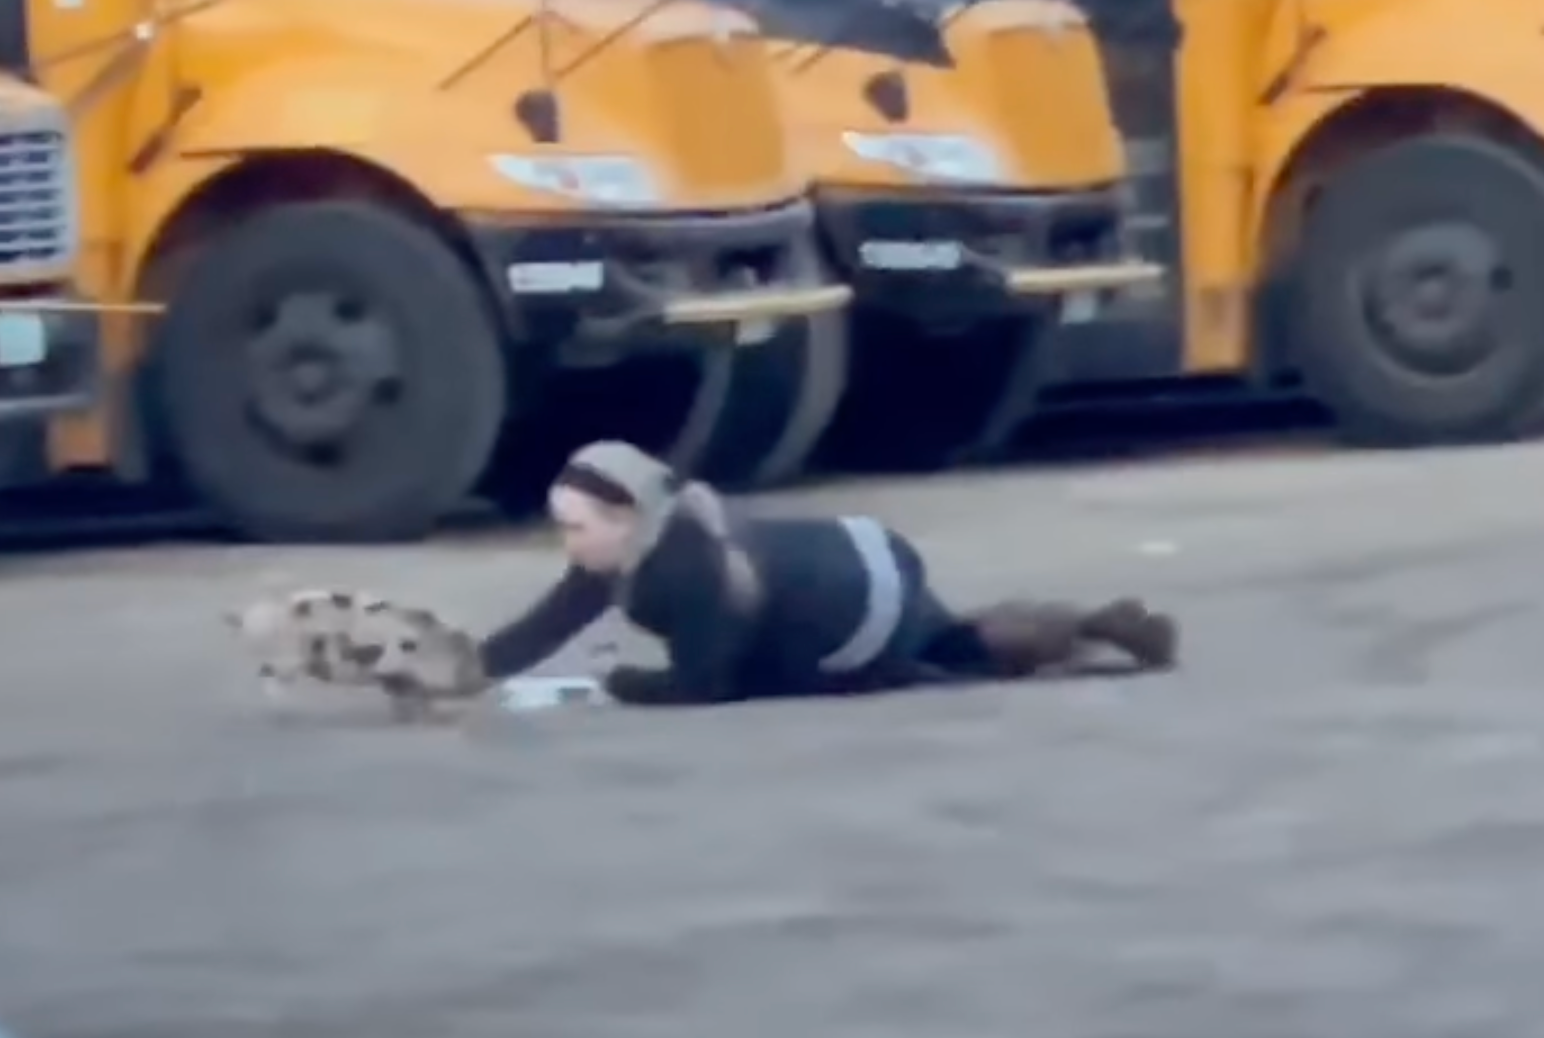 alt= Tori Gamache of Goffstown, New Hampshire lays on the ground in a parking lot of school buses and gains a young pig's trust so she can get him safely back to his family.